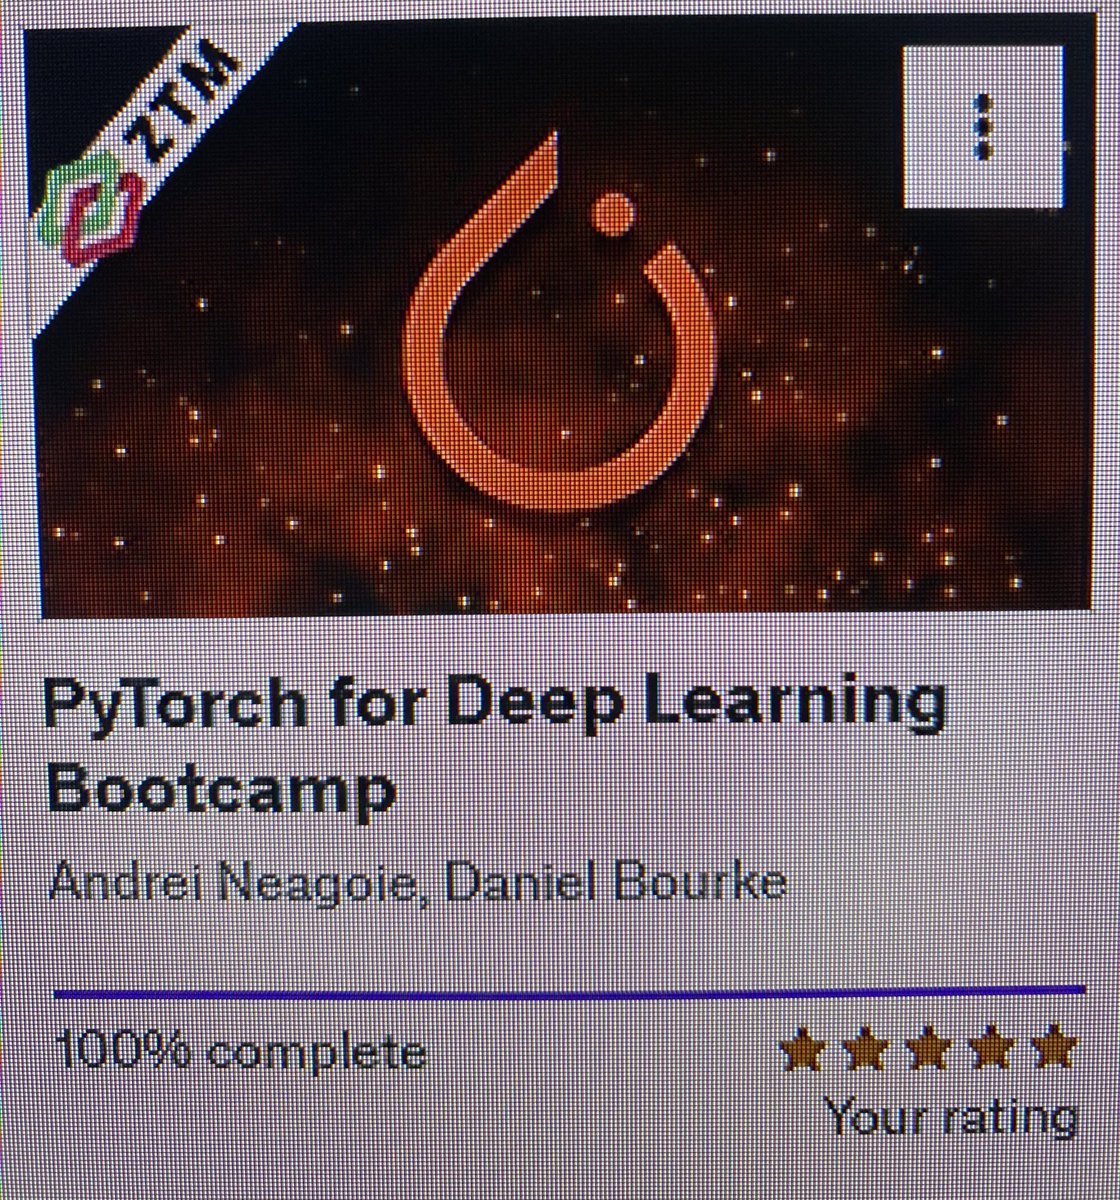 52 hours of course material 
Was crazy but quite interesting to put some of the theories to code 😅
Thank you  to @zerotomasteryio  #pytorch #deeplearn #ai